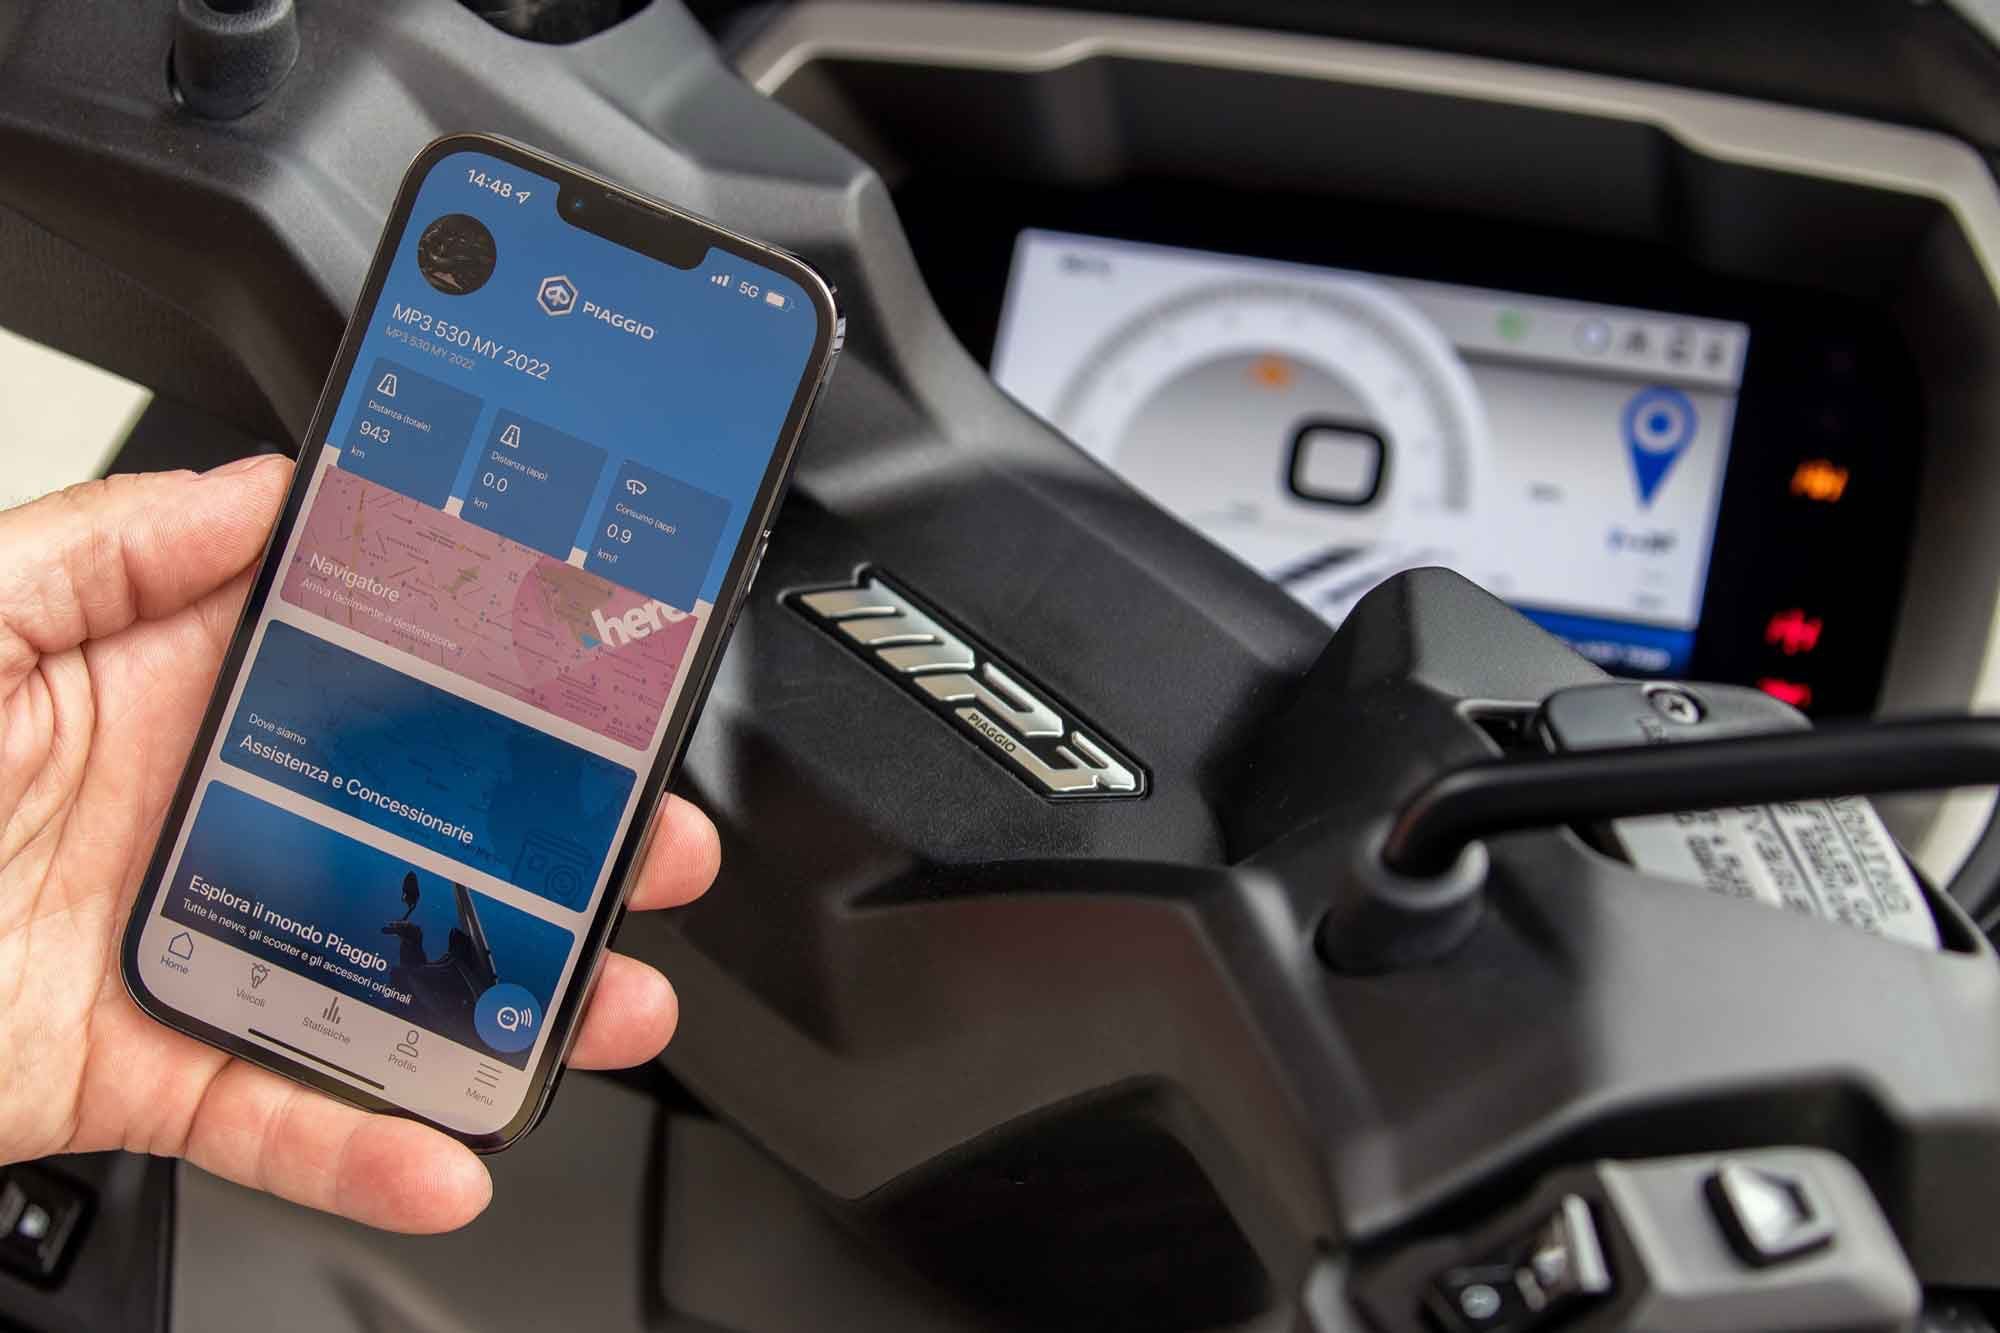 As we’ve seen with many other Italian motorcycles, the MP3 fully integrates with the rider’s phone. The large instrument display also functions as a video panel and a monitor for the backup camera.